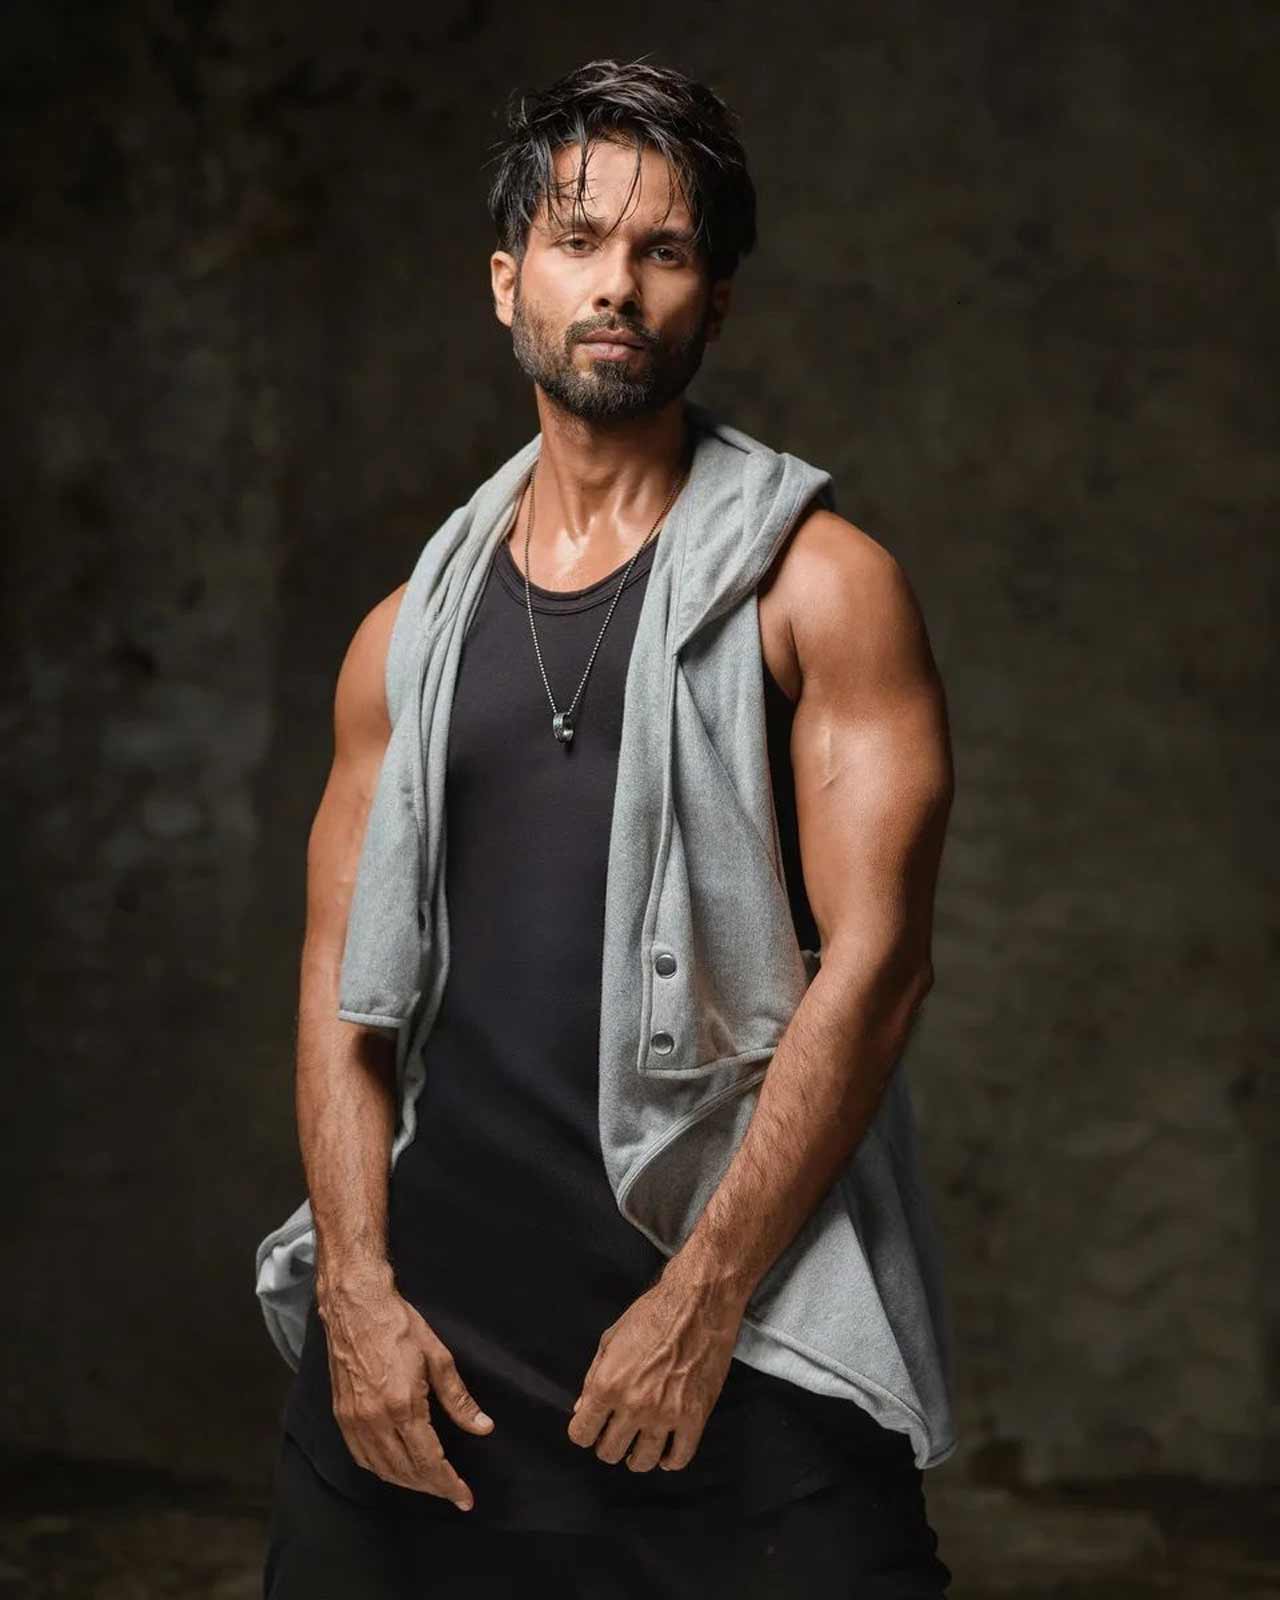 Shahid Kapoor: The actor credits the author Brian Hines' book Life is Fair for influencing a vegetarian lifestyle choice. Talking about it, Shahid said in a statement, 